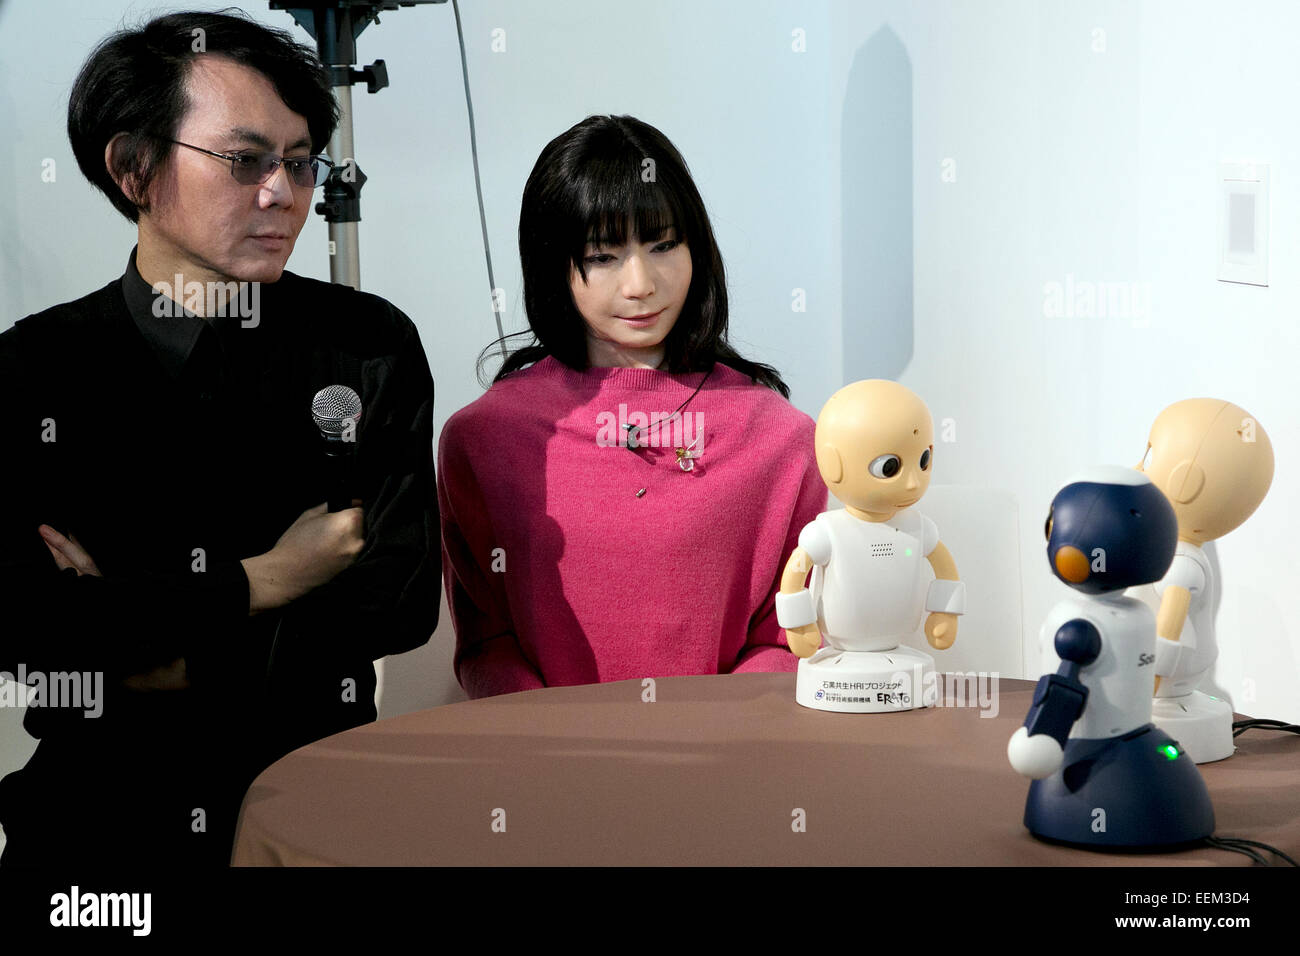 Tokyo, Japan. 20th Jan, 2015. Hiroshi Ishiguro,  Hiroshi Ishiguro professor of Osaka University speaks with CommU and Sota robots during a press conference at the National Museum of Emerging Science and Innovation Miraikan. The robots CommU and Sota can interact with humans and other robots in normal life conversation. According to profesor Ishiguro the robots can to speak, answer and ask multiple questions in Japanese and English, which can help users to learn other languages. Credit:  Rodrigo Reyes Marin/AFLO/Alamy Live News Stock Photo